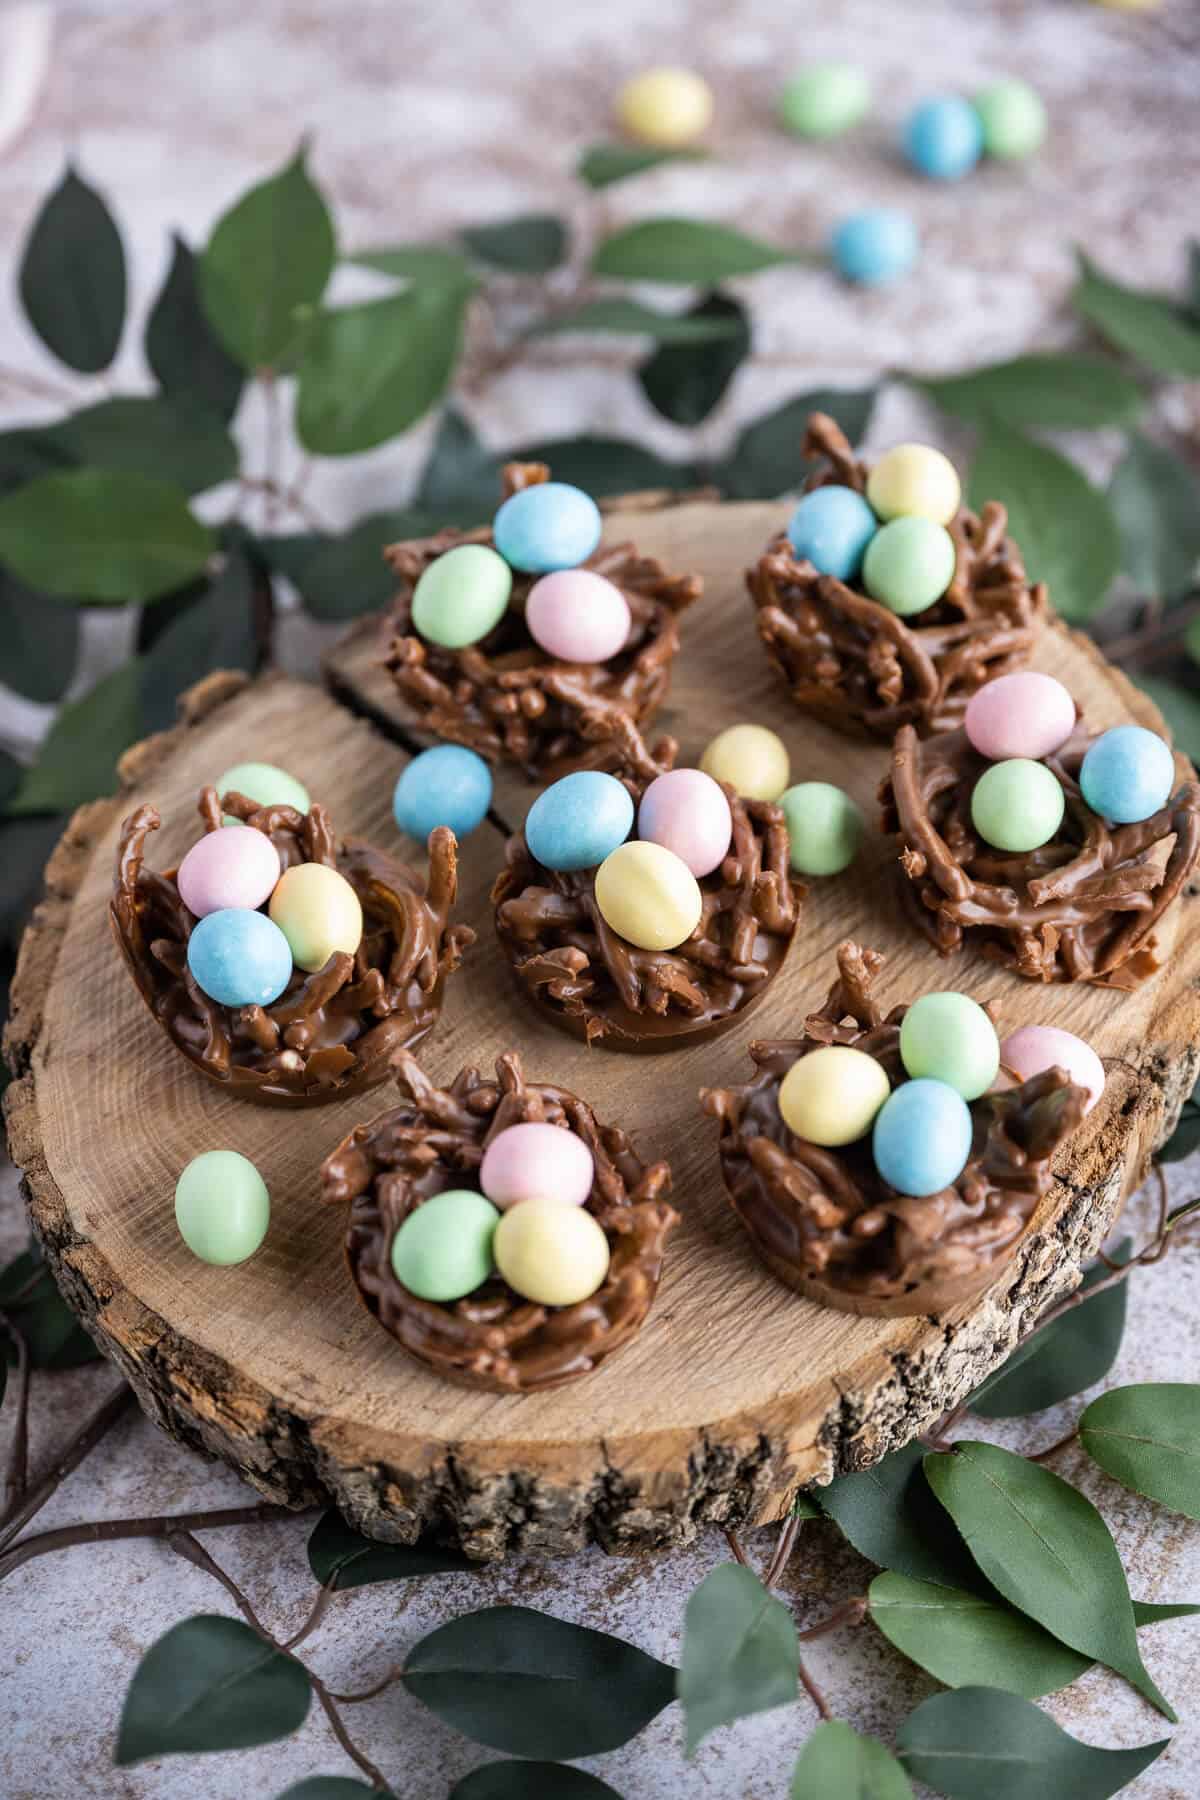 A group of chocolate birds nests filled with mini candy coated eggs on a wooden serving platter surrounded with greenery.